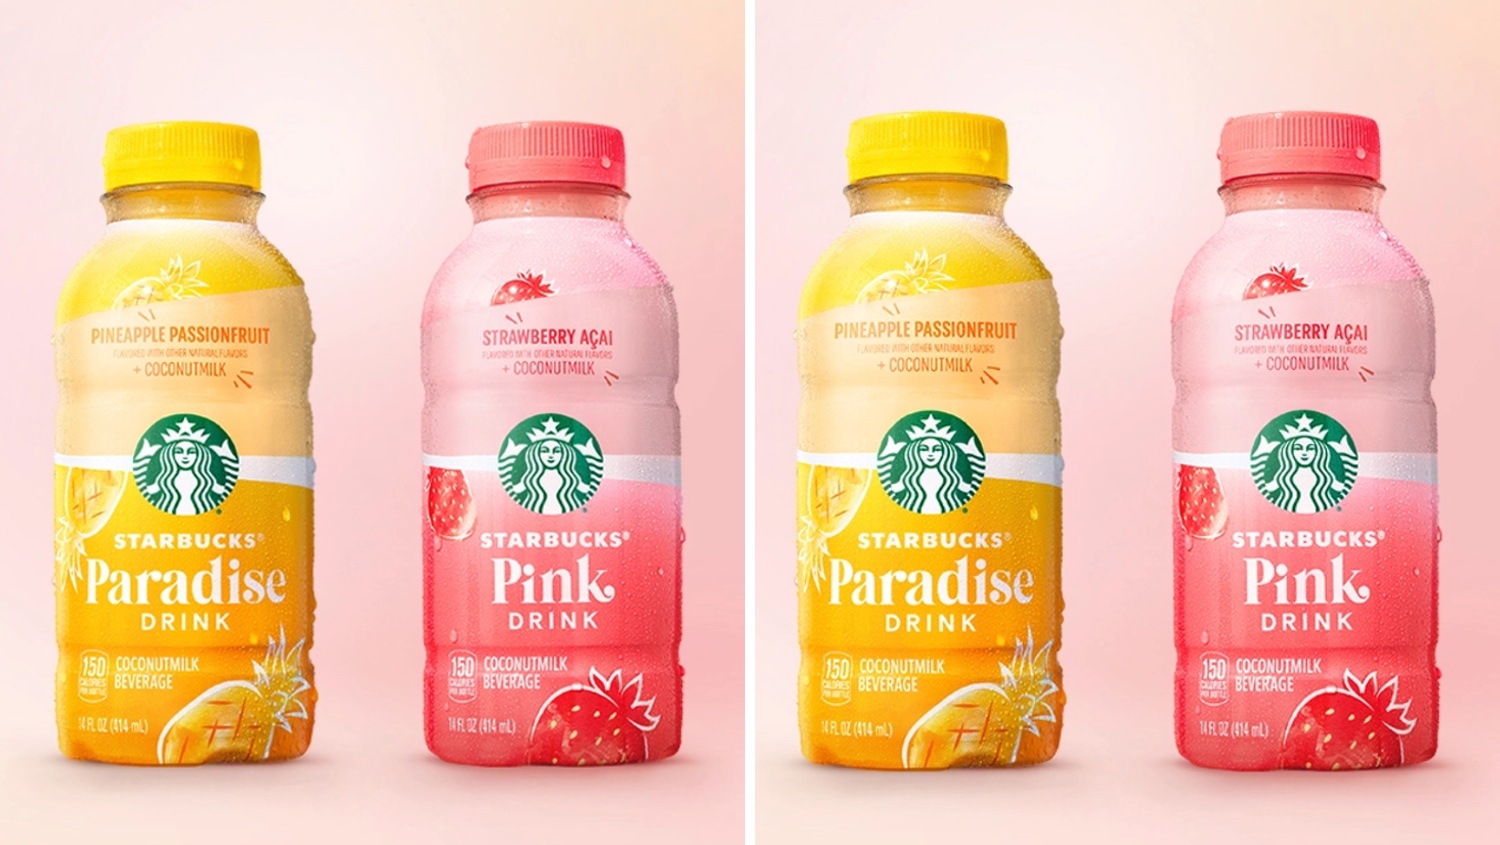 Starbucks' new bottled Pink Drink and Paradise Drink